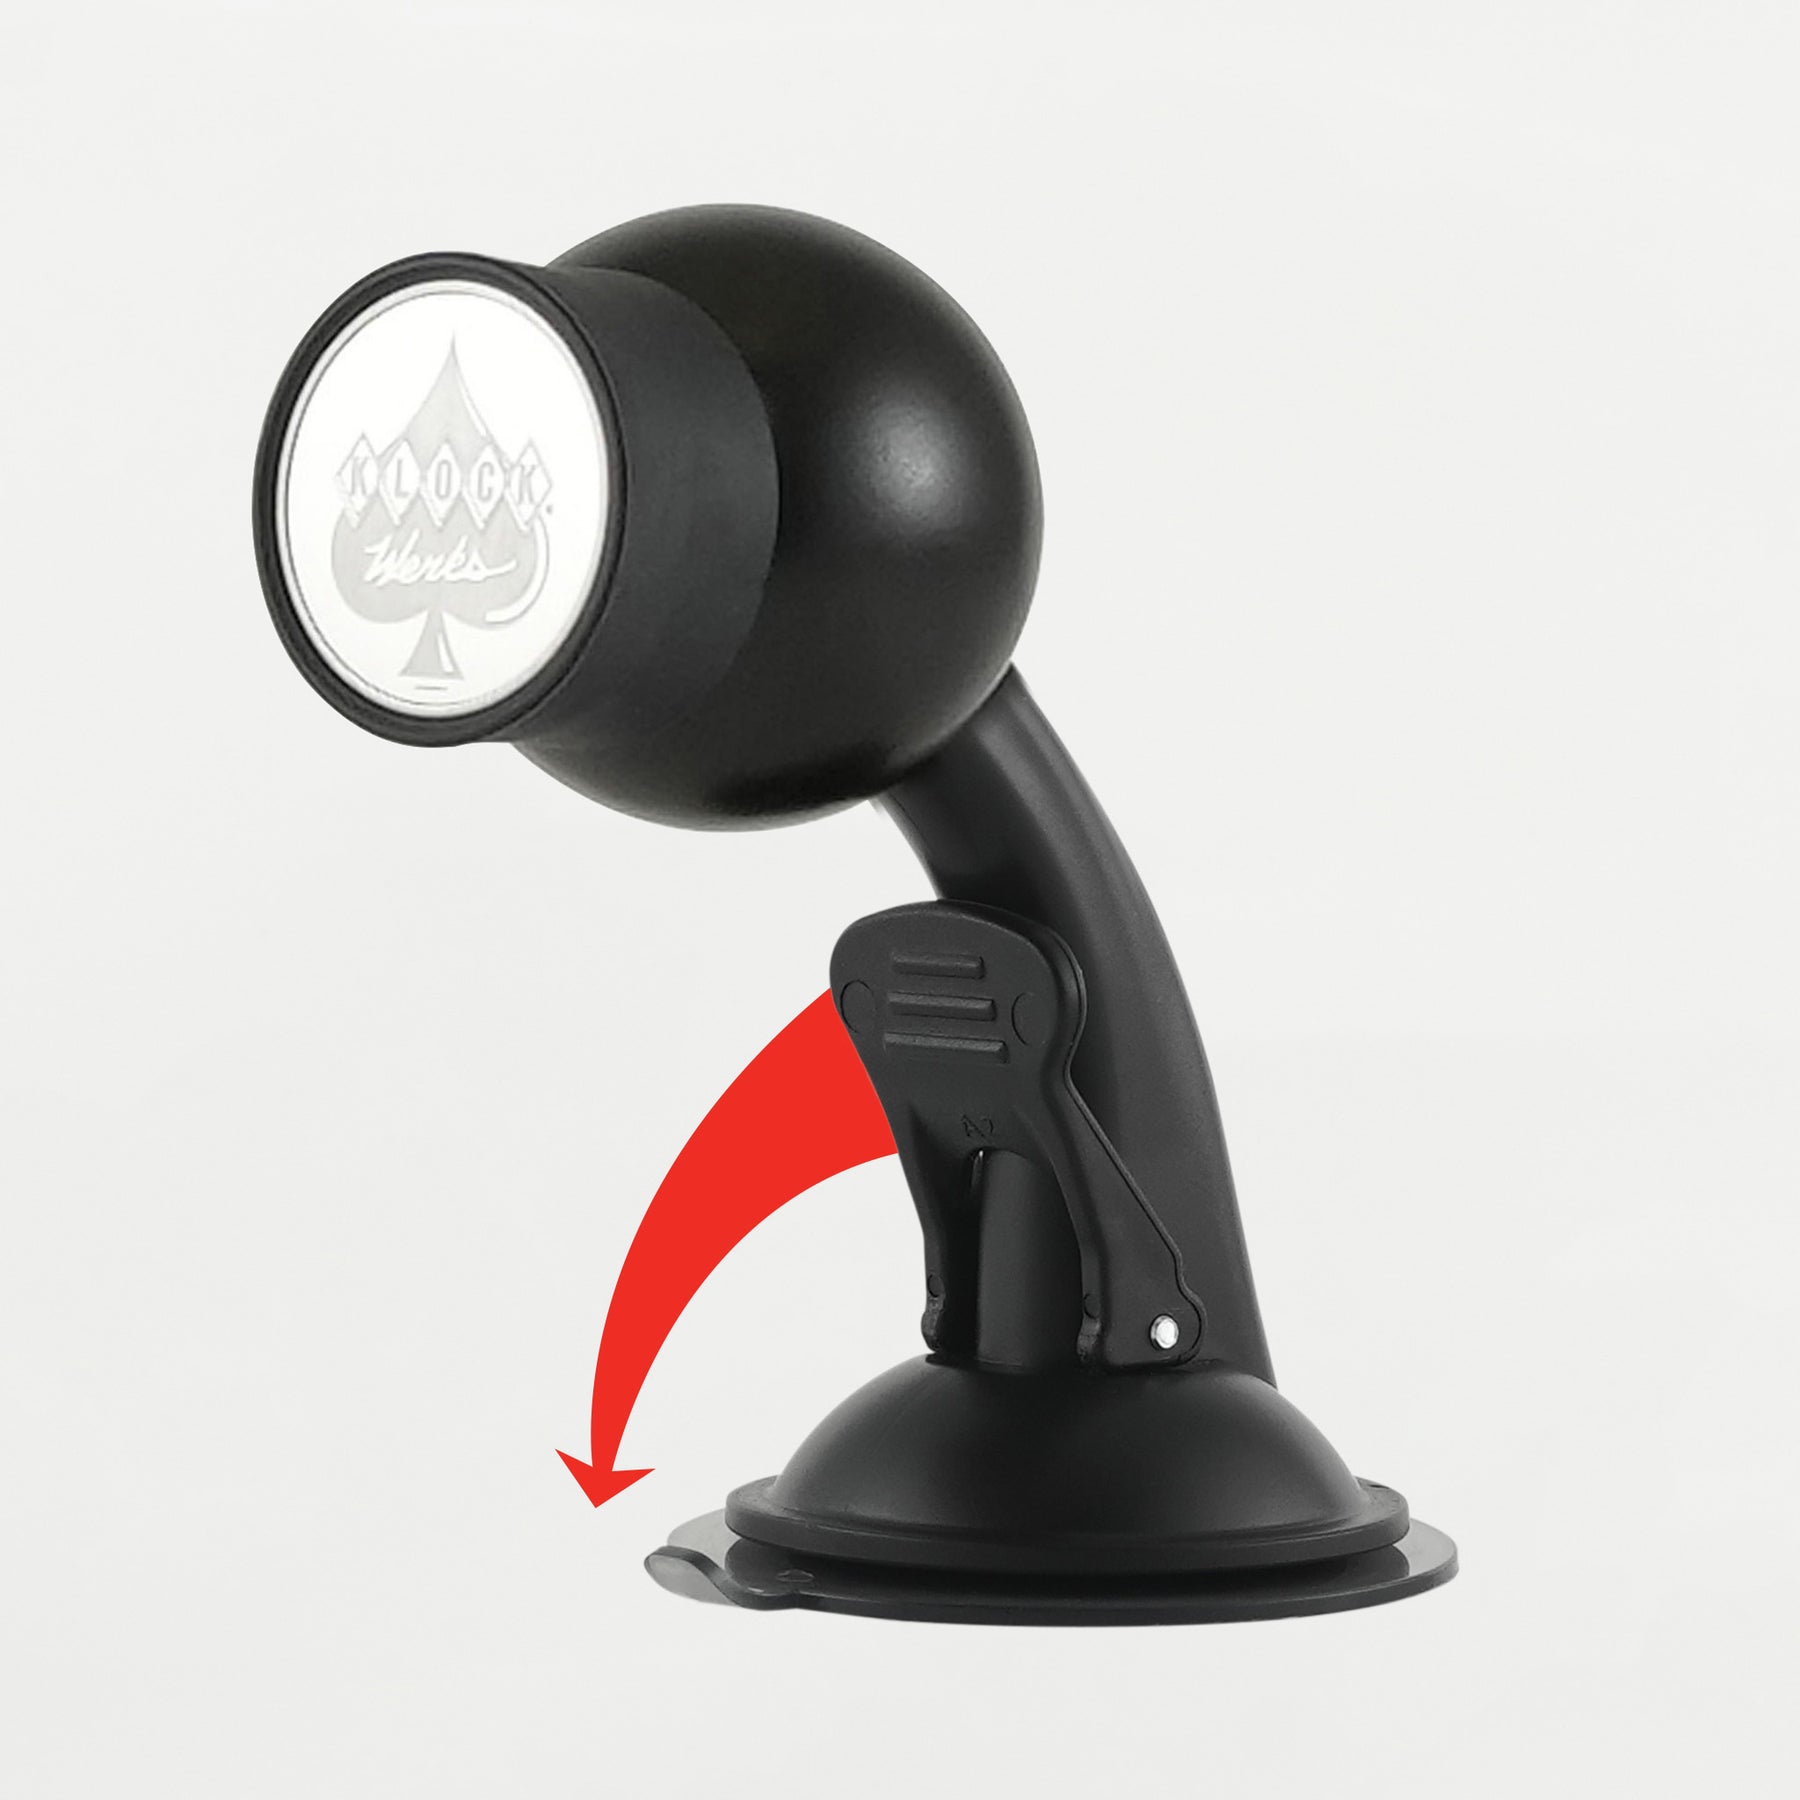 iOtraveler Suction Magnetic Phone Mount showing location of quick-release lever allows for quick positioning